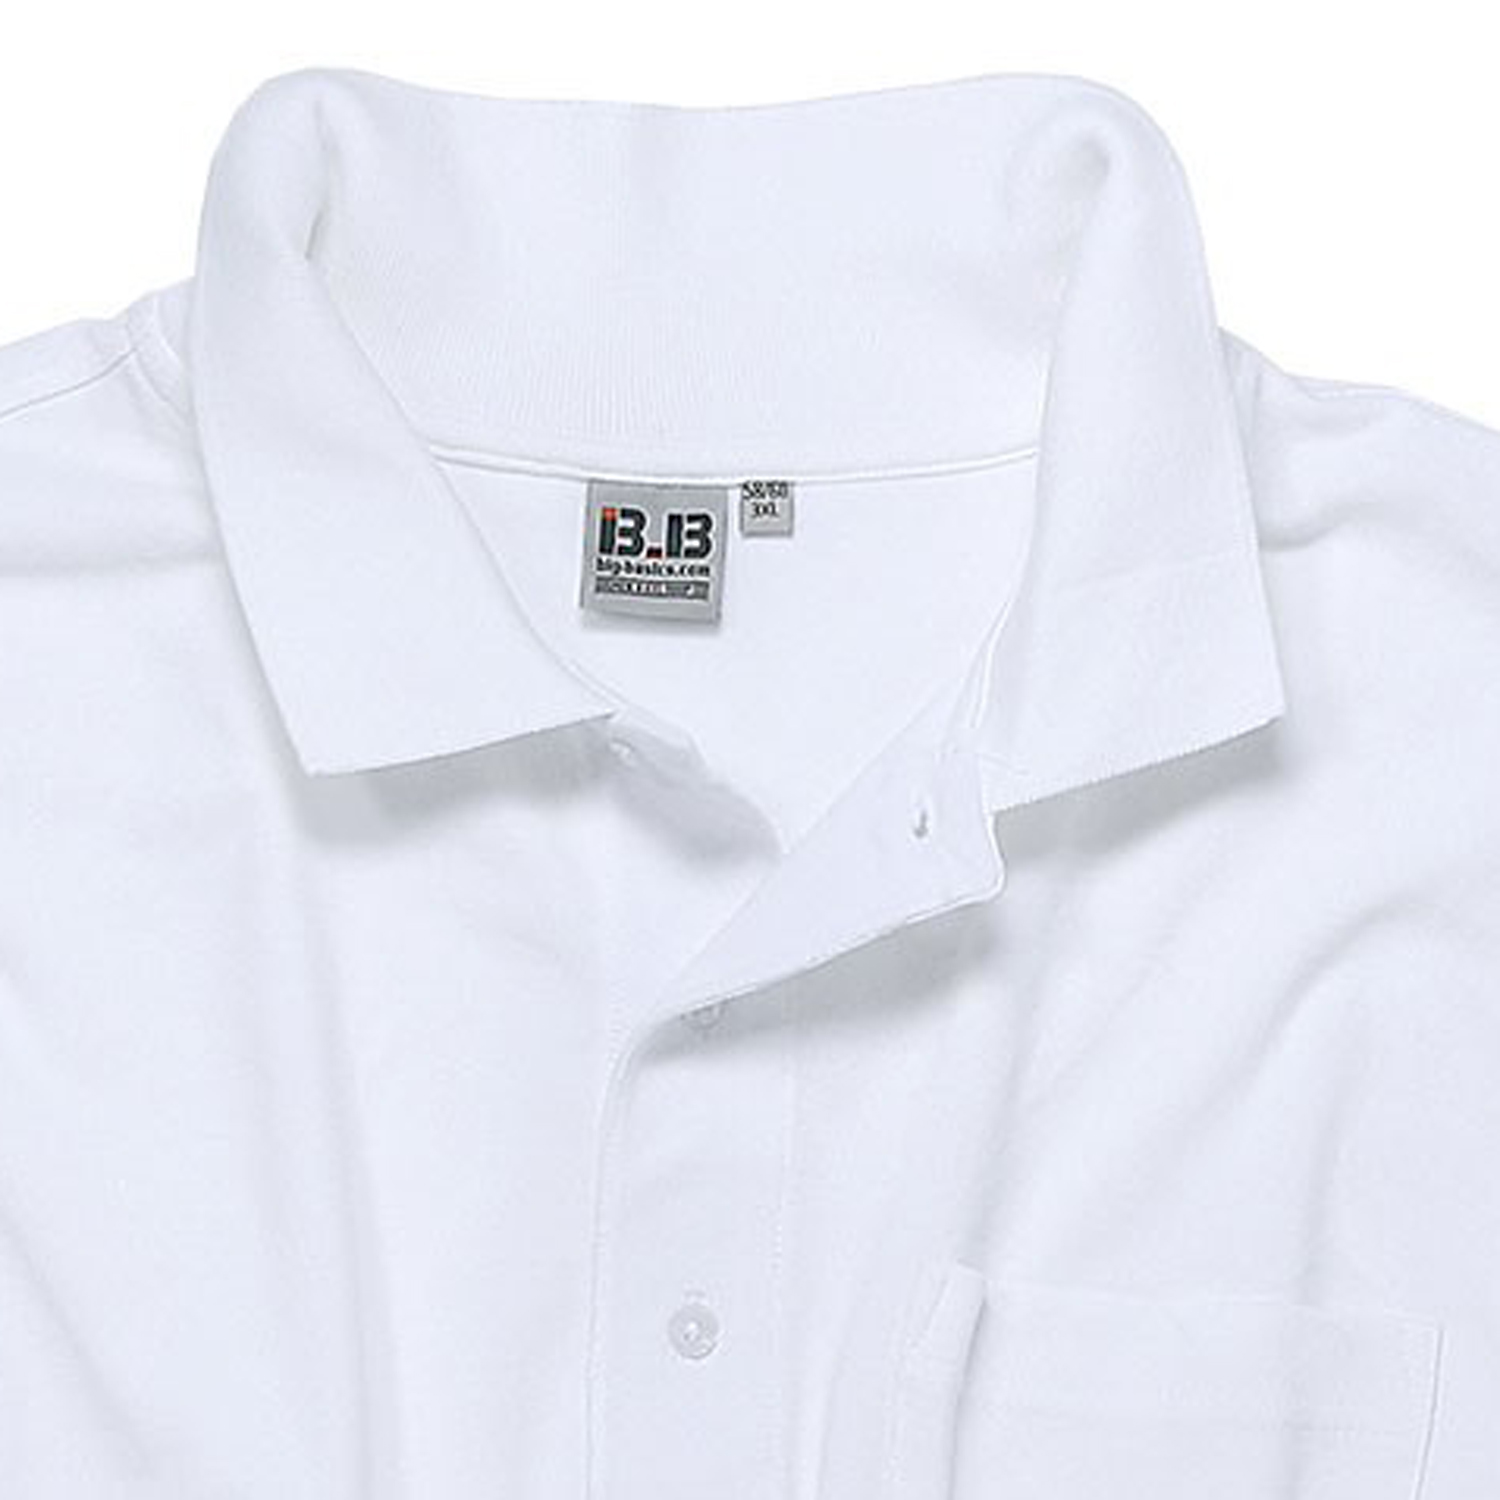 White polo shirt by Big-Basics in oversizes up to 8XL